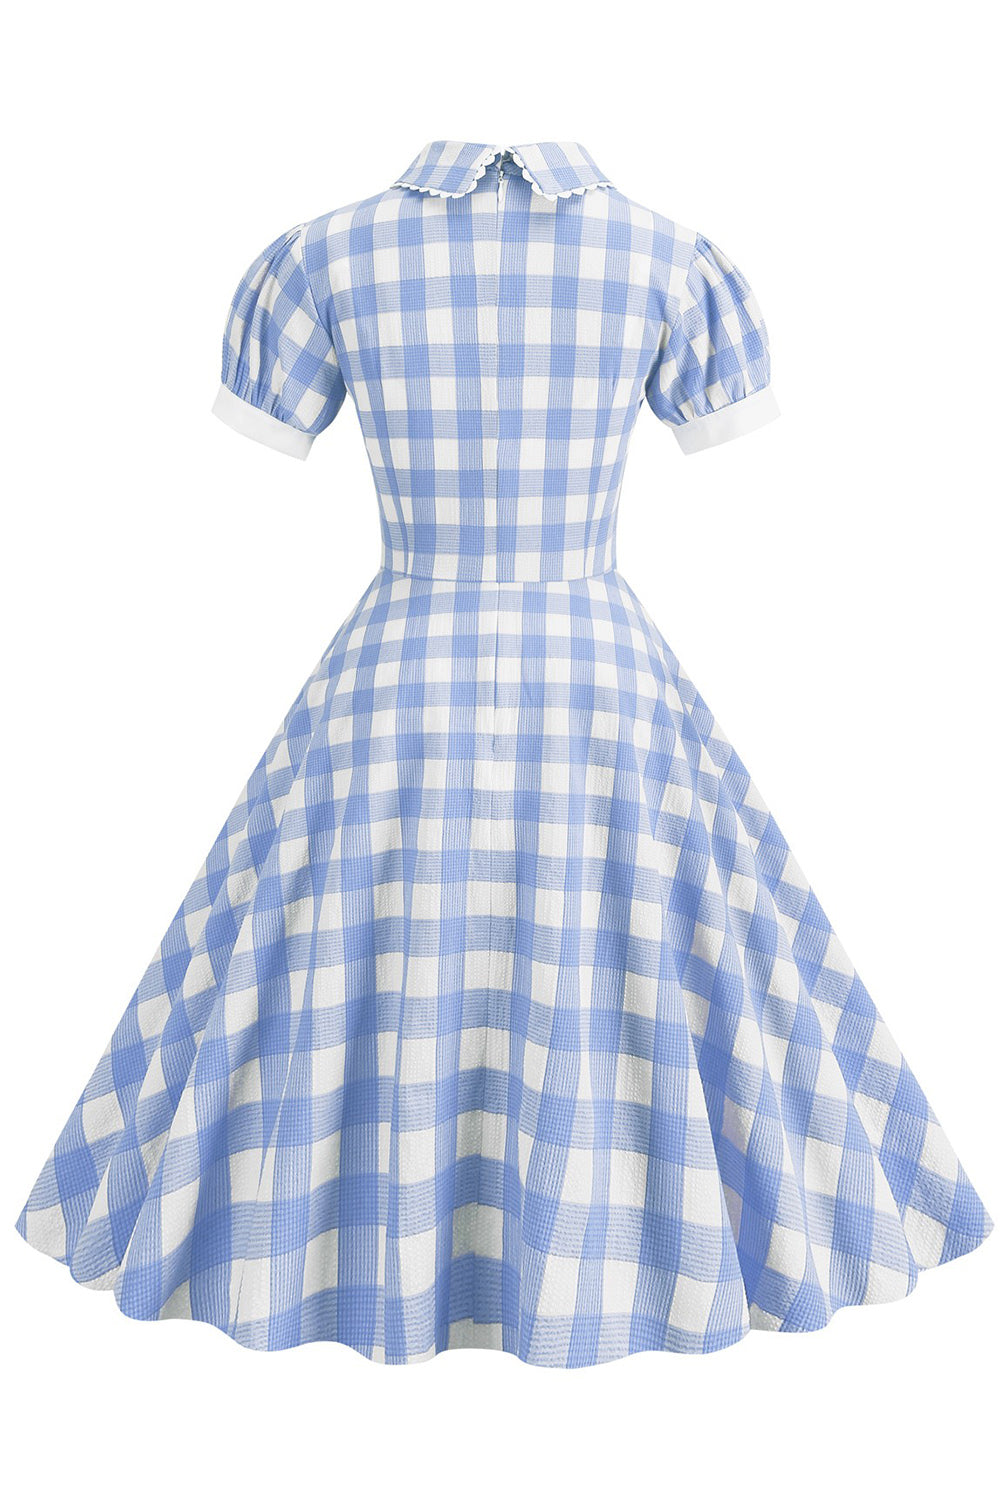 Zapaka Women Blue Plaid Doll Collar Vintage Dress with Short Sleeves ...